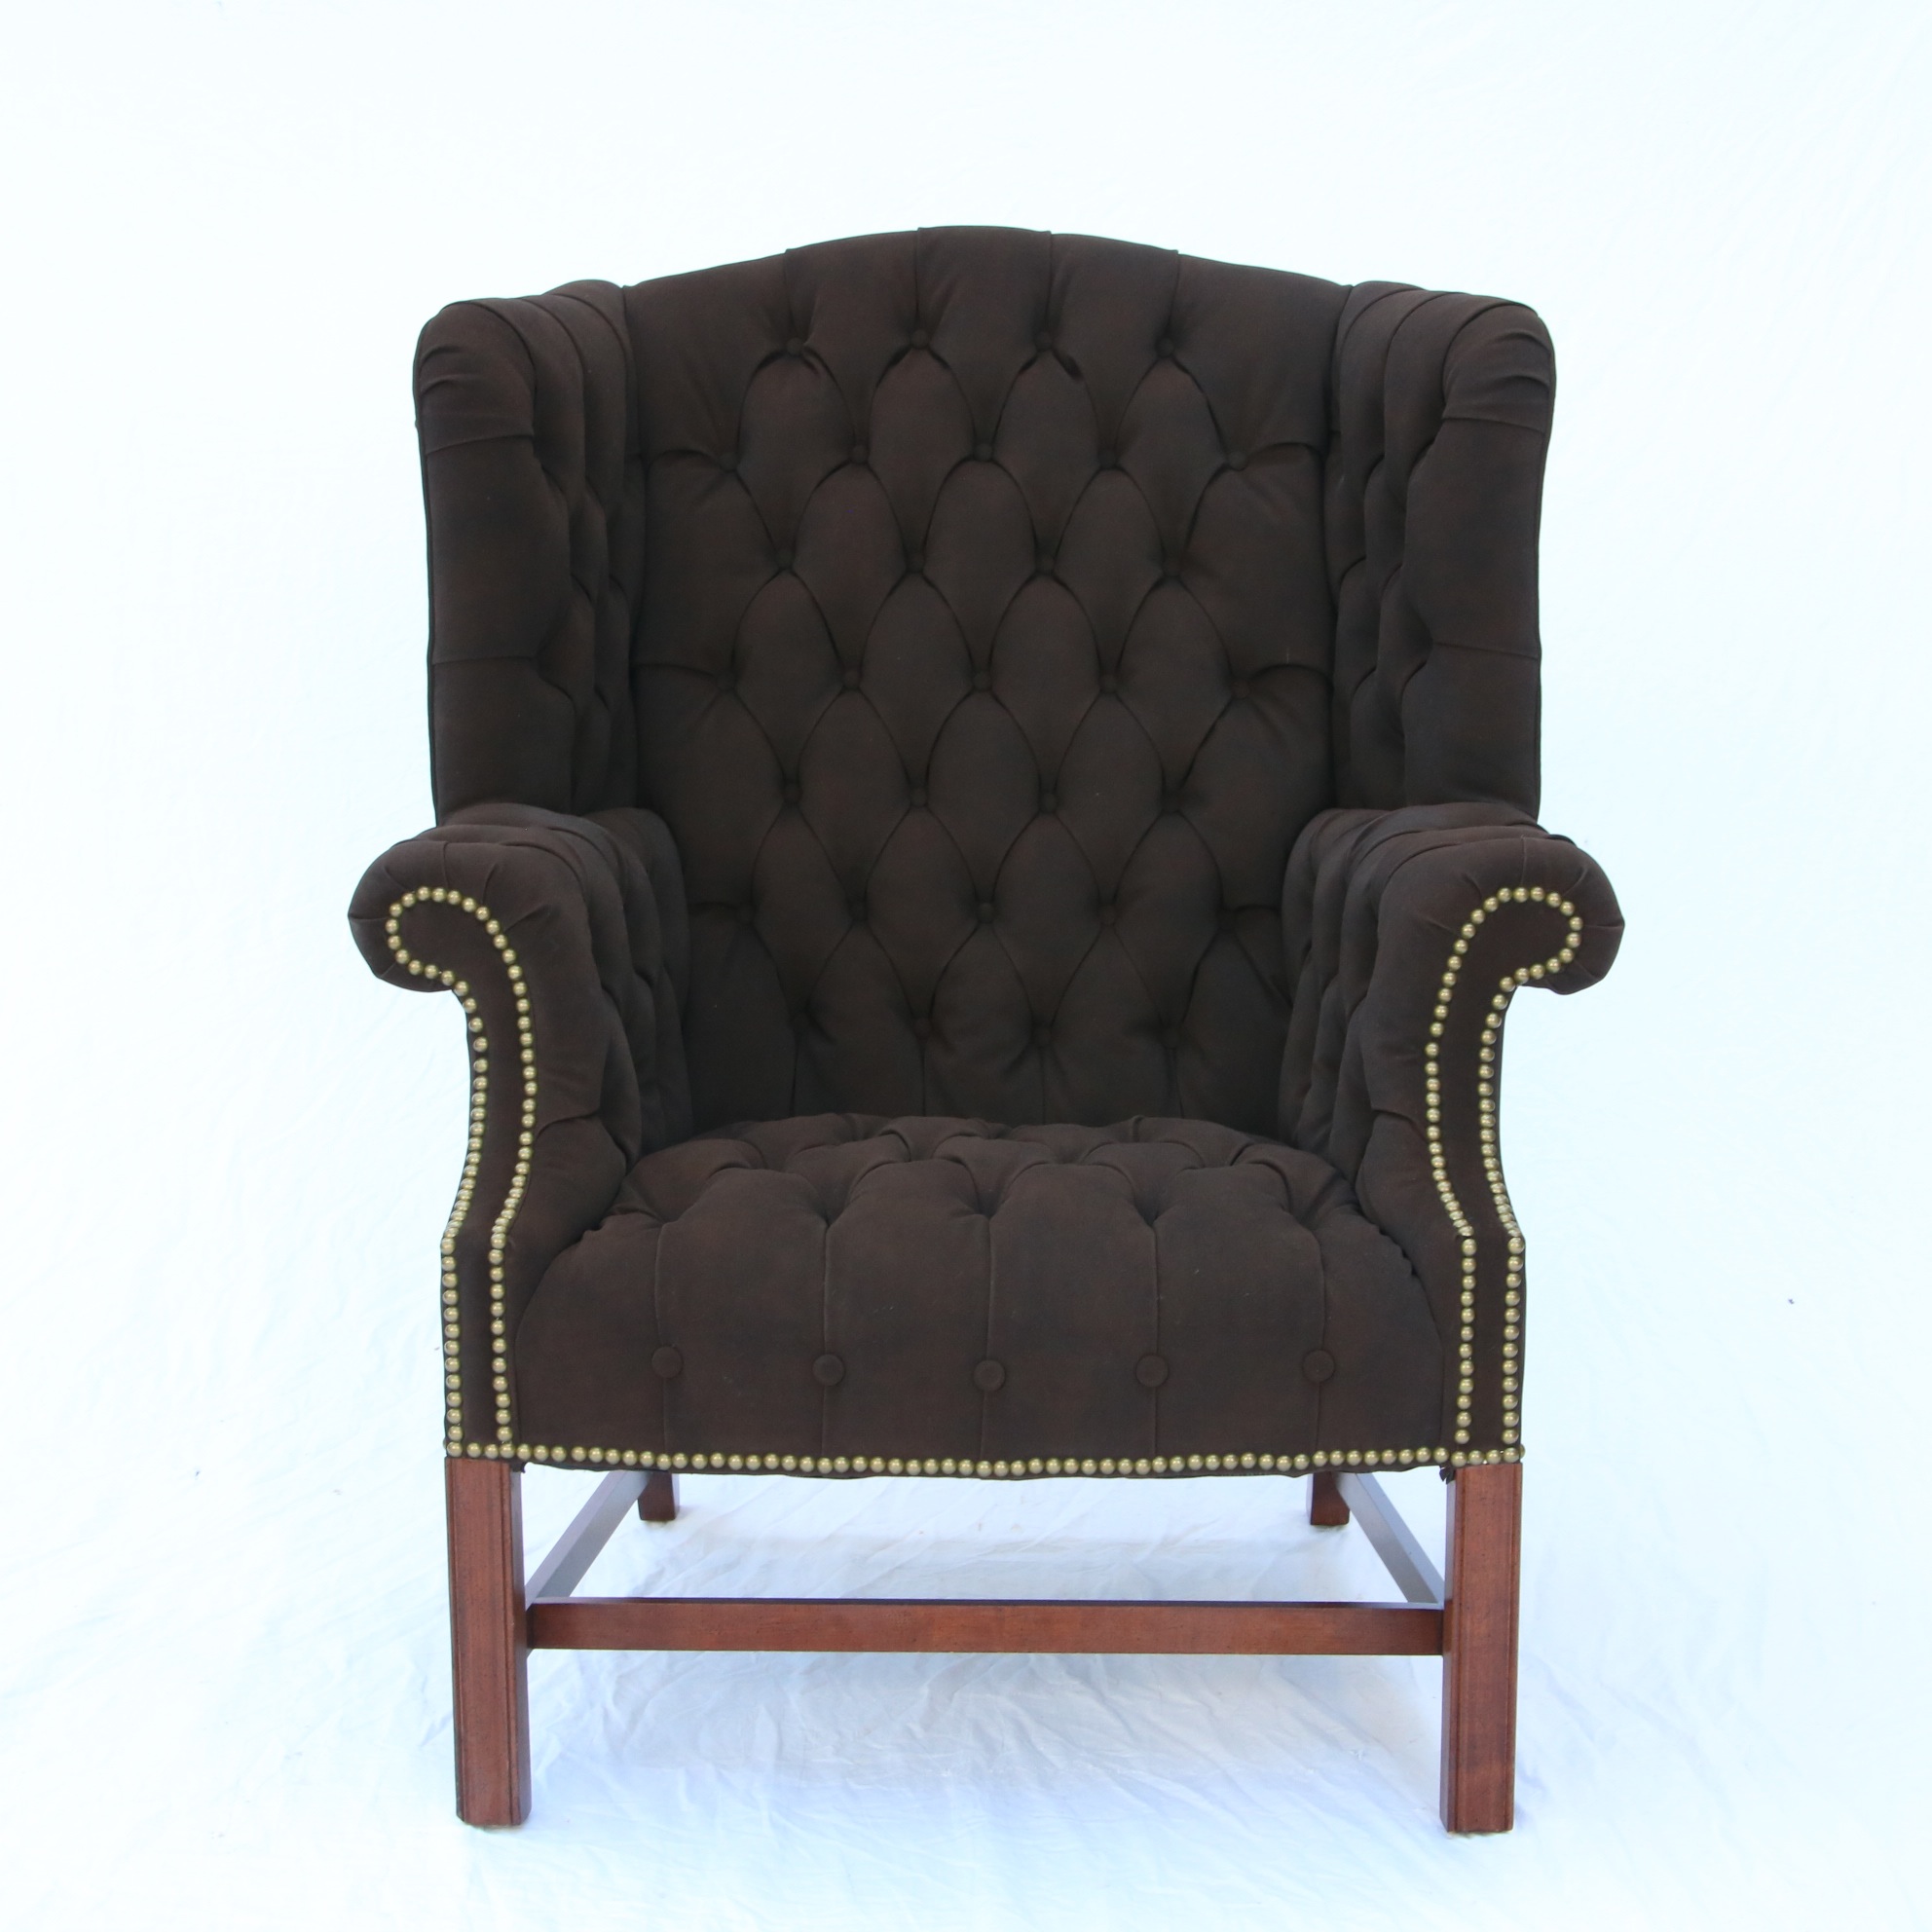 A Vintage Leather Tufted Wingback Chair By Drexel Black Suede